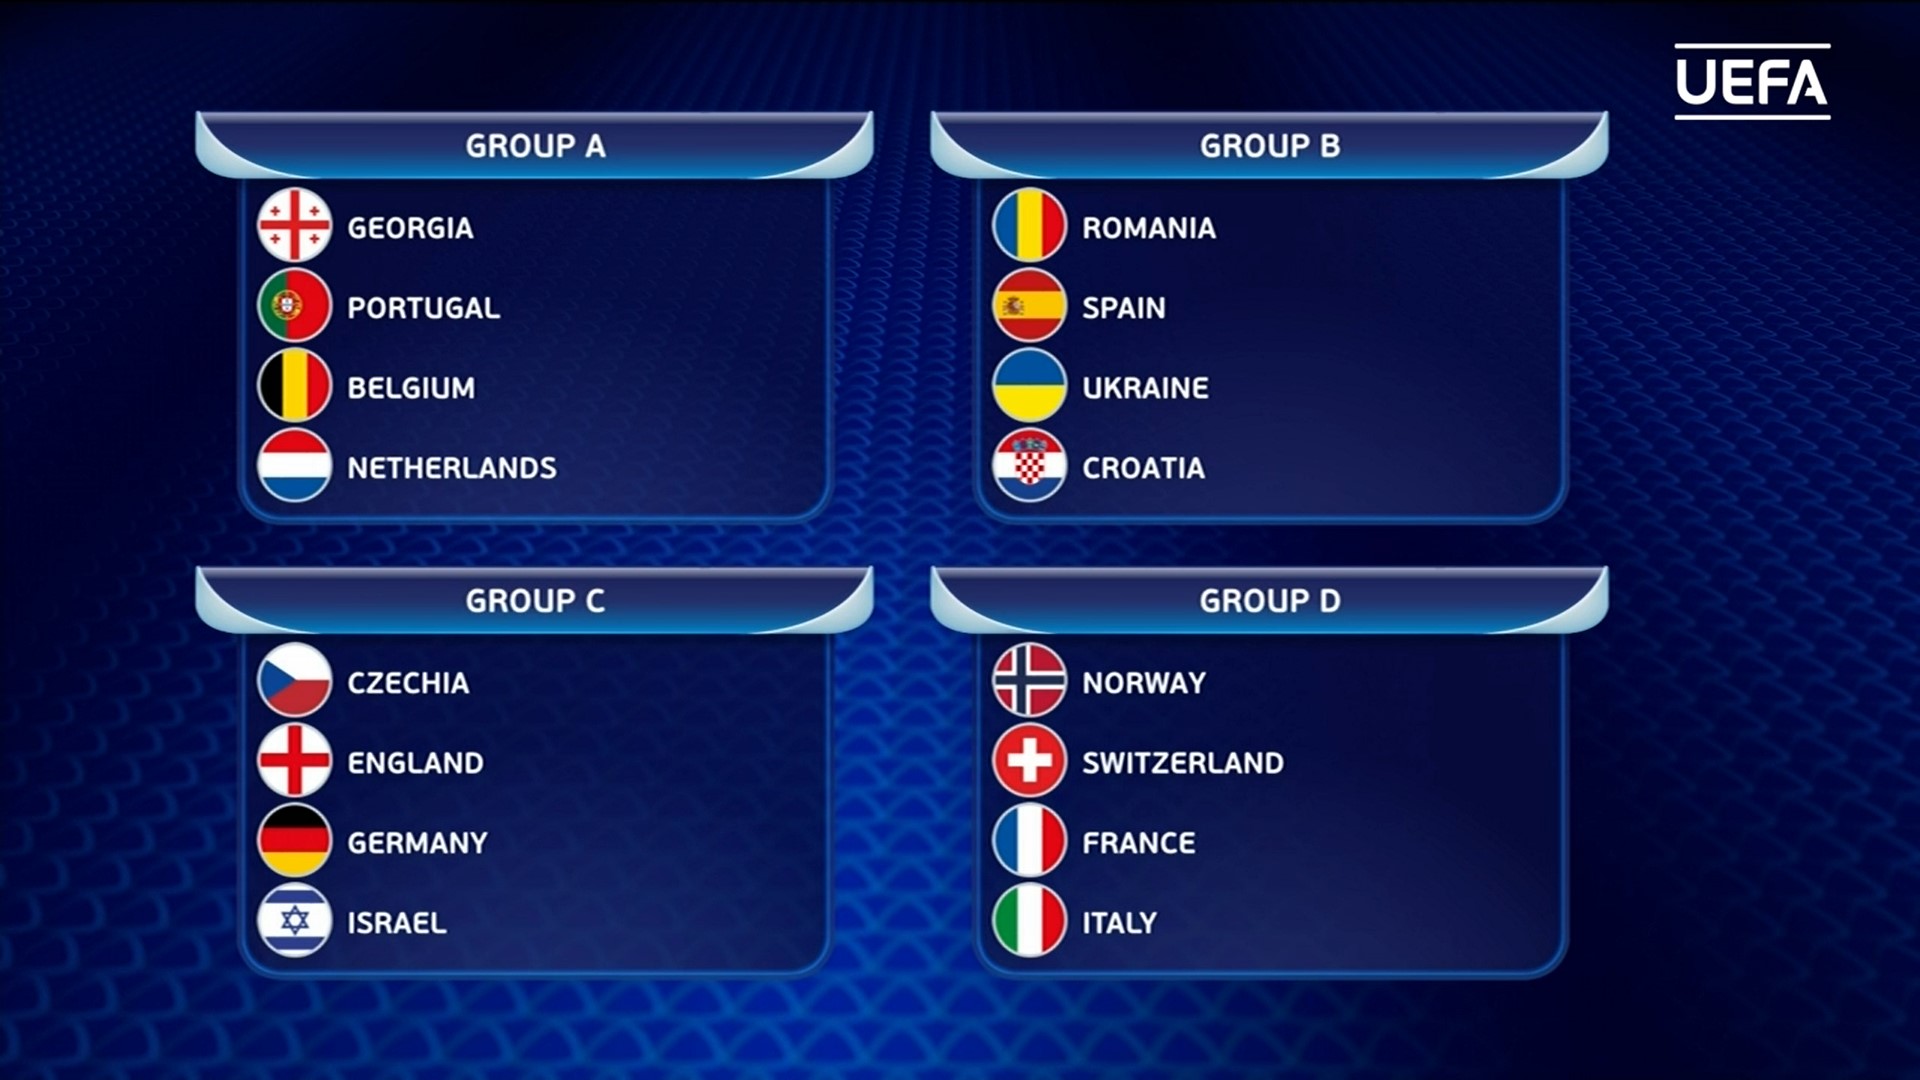 European Championship final groups drawn: Italy in Group D with Norway,  Switzerland and France